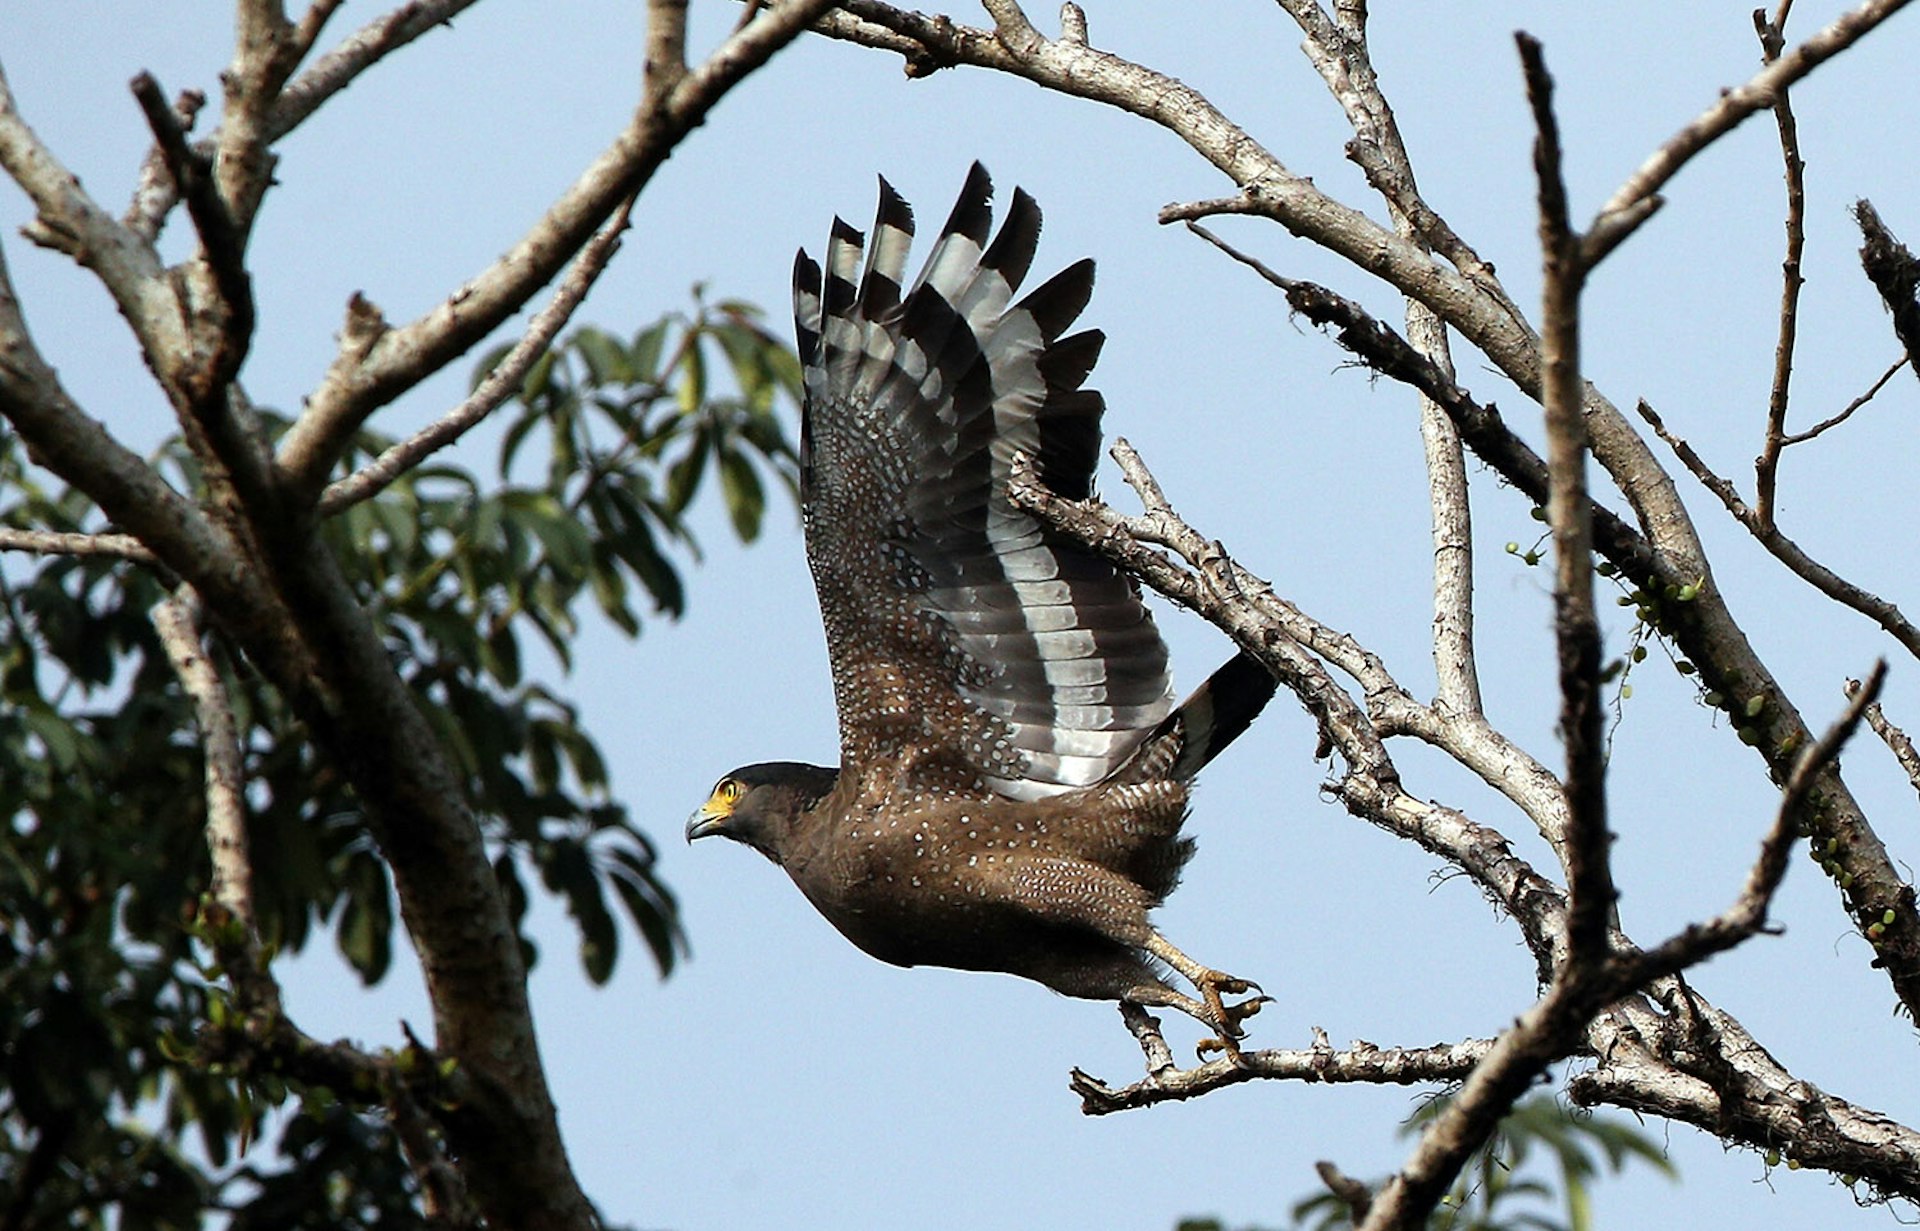 A crested serpent eagle preparing to soar off the branch of a tree in Malaysia